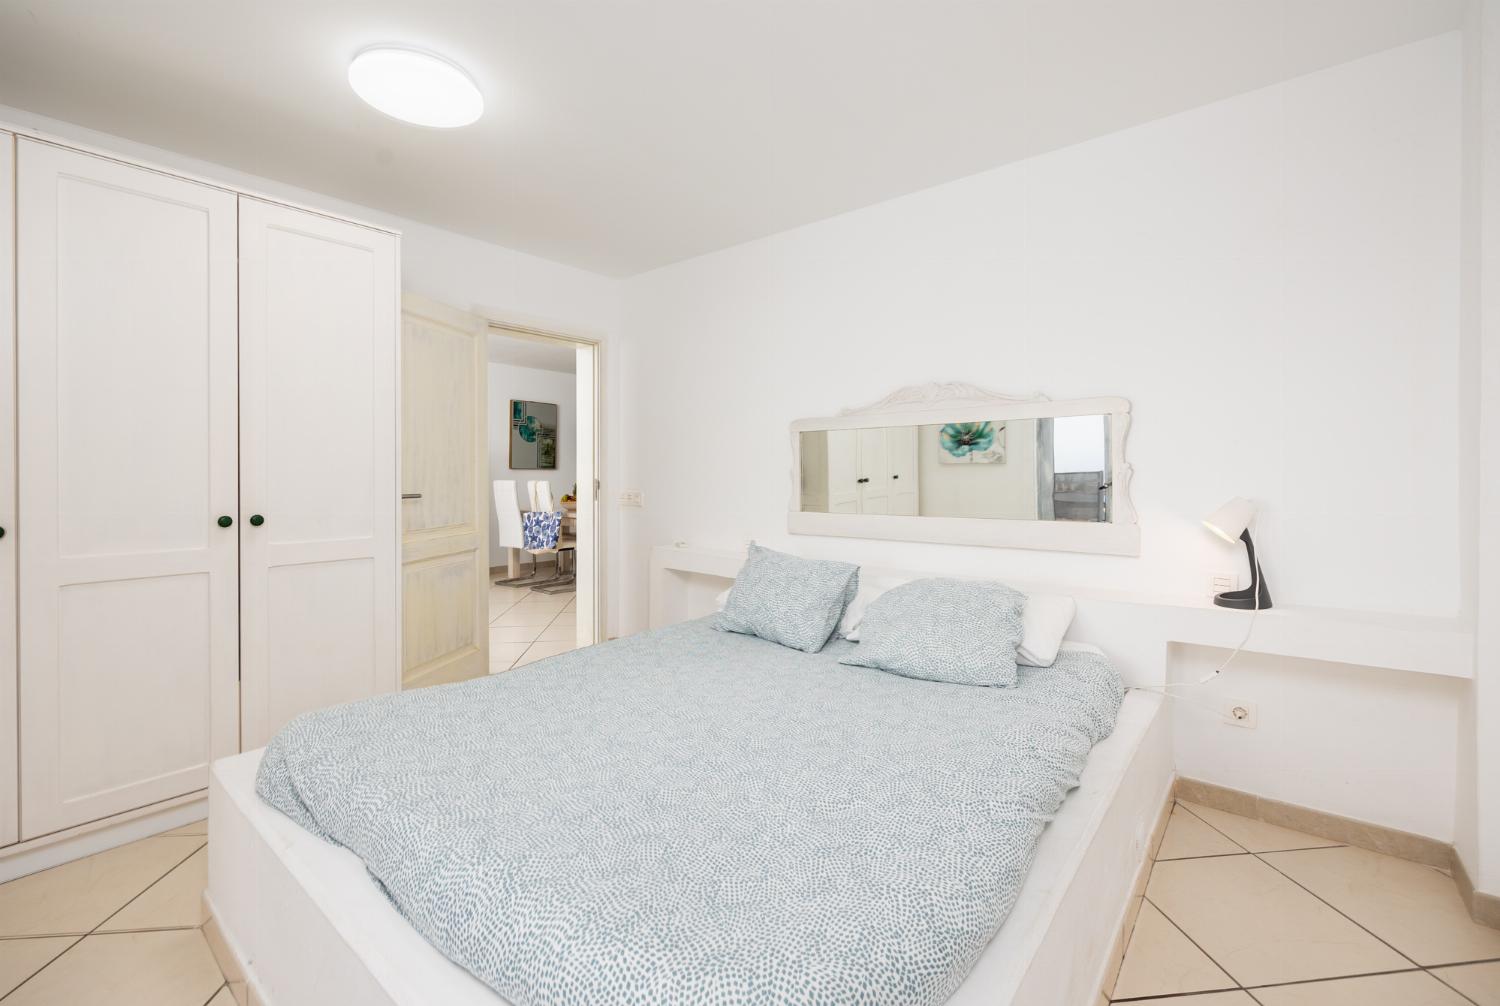 Unit 1: double bedroom with A/C and sea views